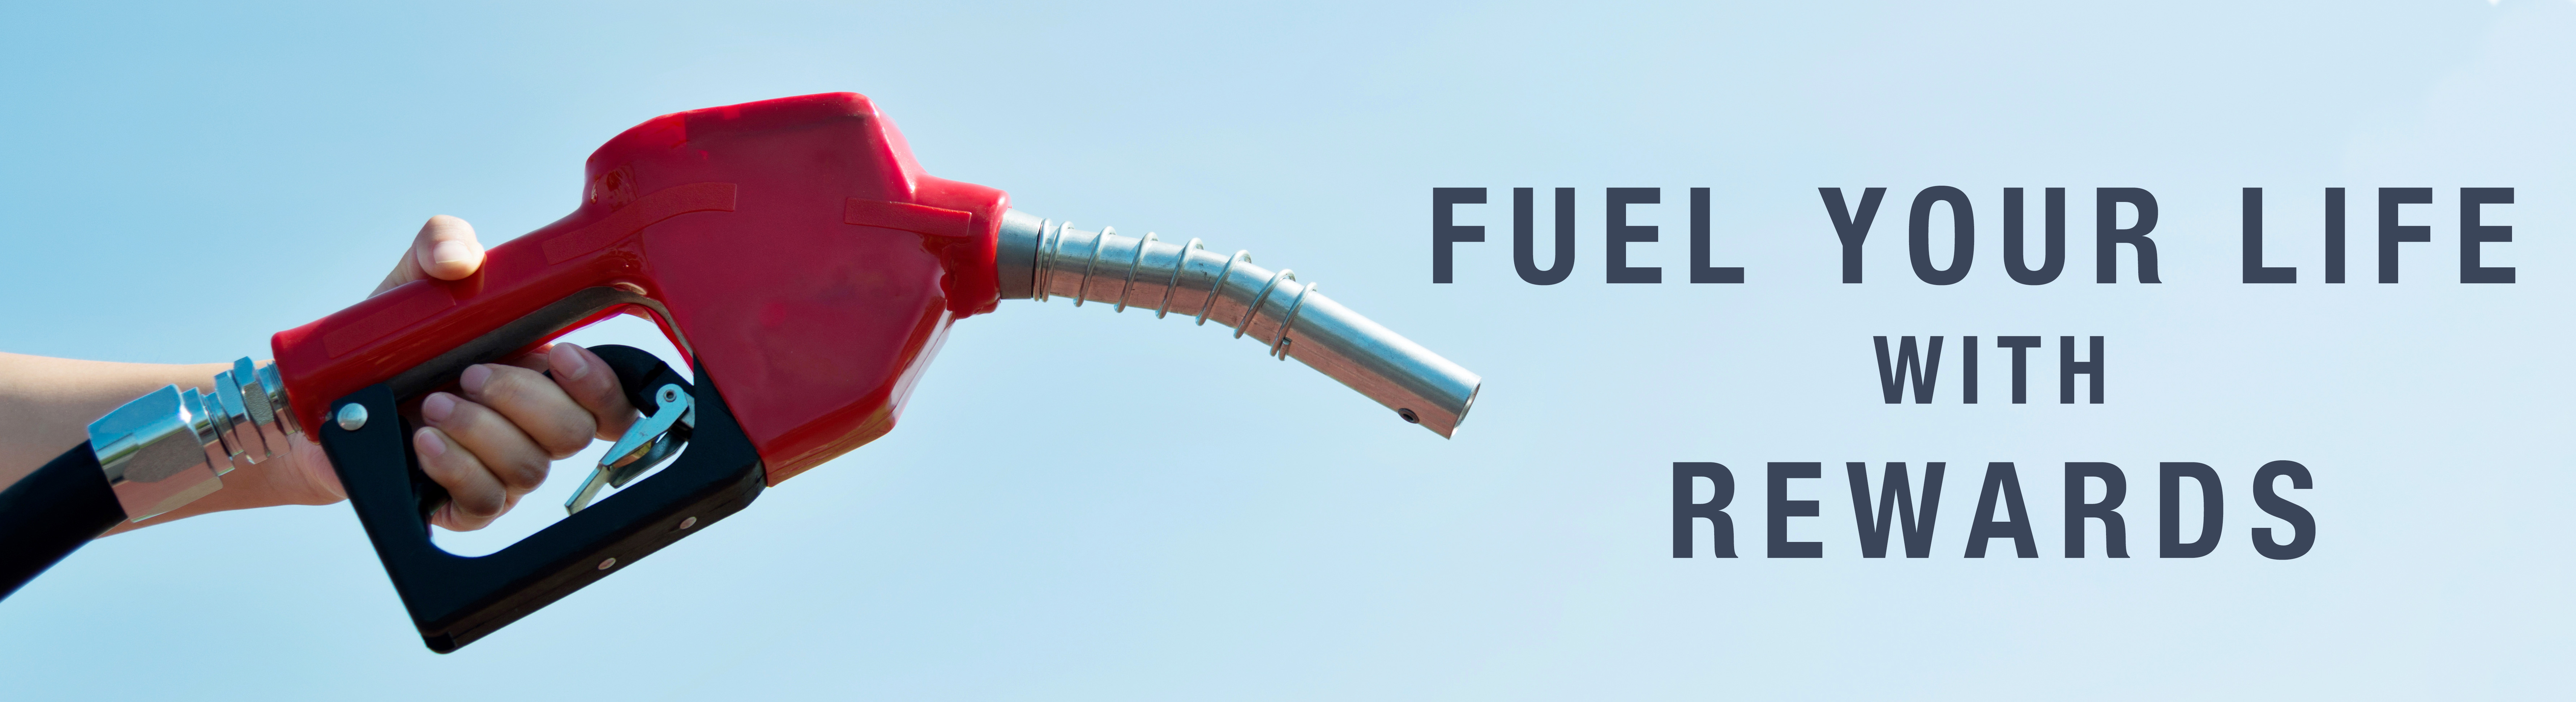 Fuel your Life with Rewards Header Image